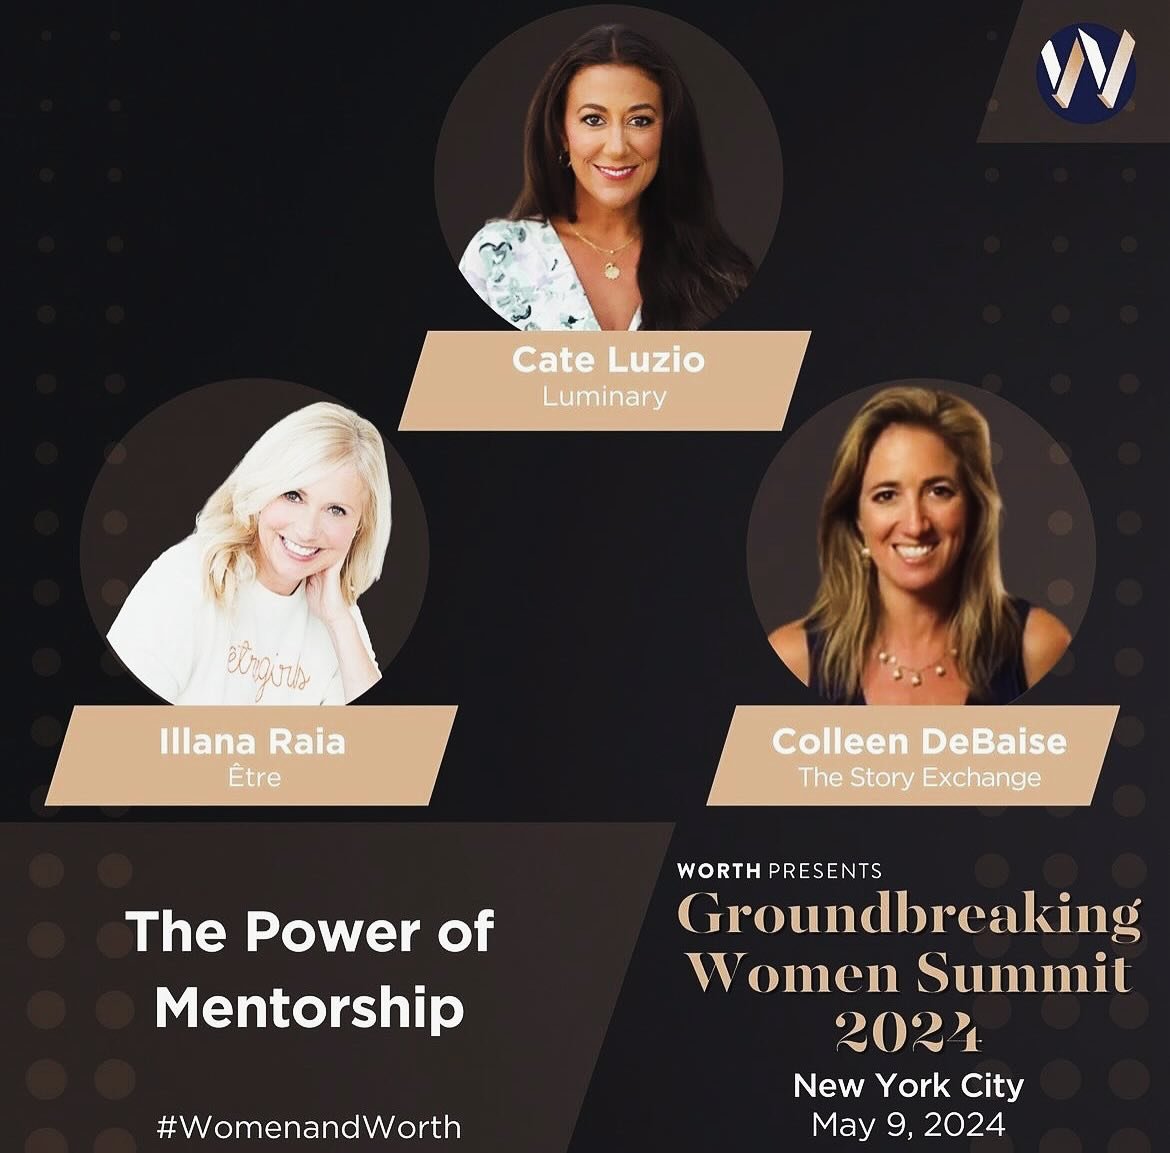 Our founder @illanaraia is going 2 B speaking about THE POWER OF MENTORSHIP with srsly epic mentors @cateluzio and @colleendebaise on May 9th! 🤩

Have a Q about #mentorship, finding a #mentor or how #mentors work in the actual work world? DM us&hell